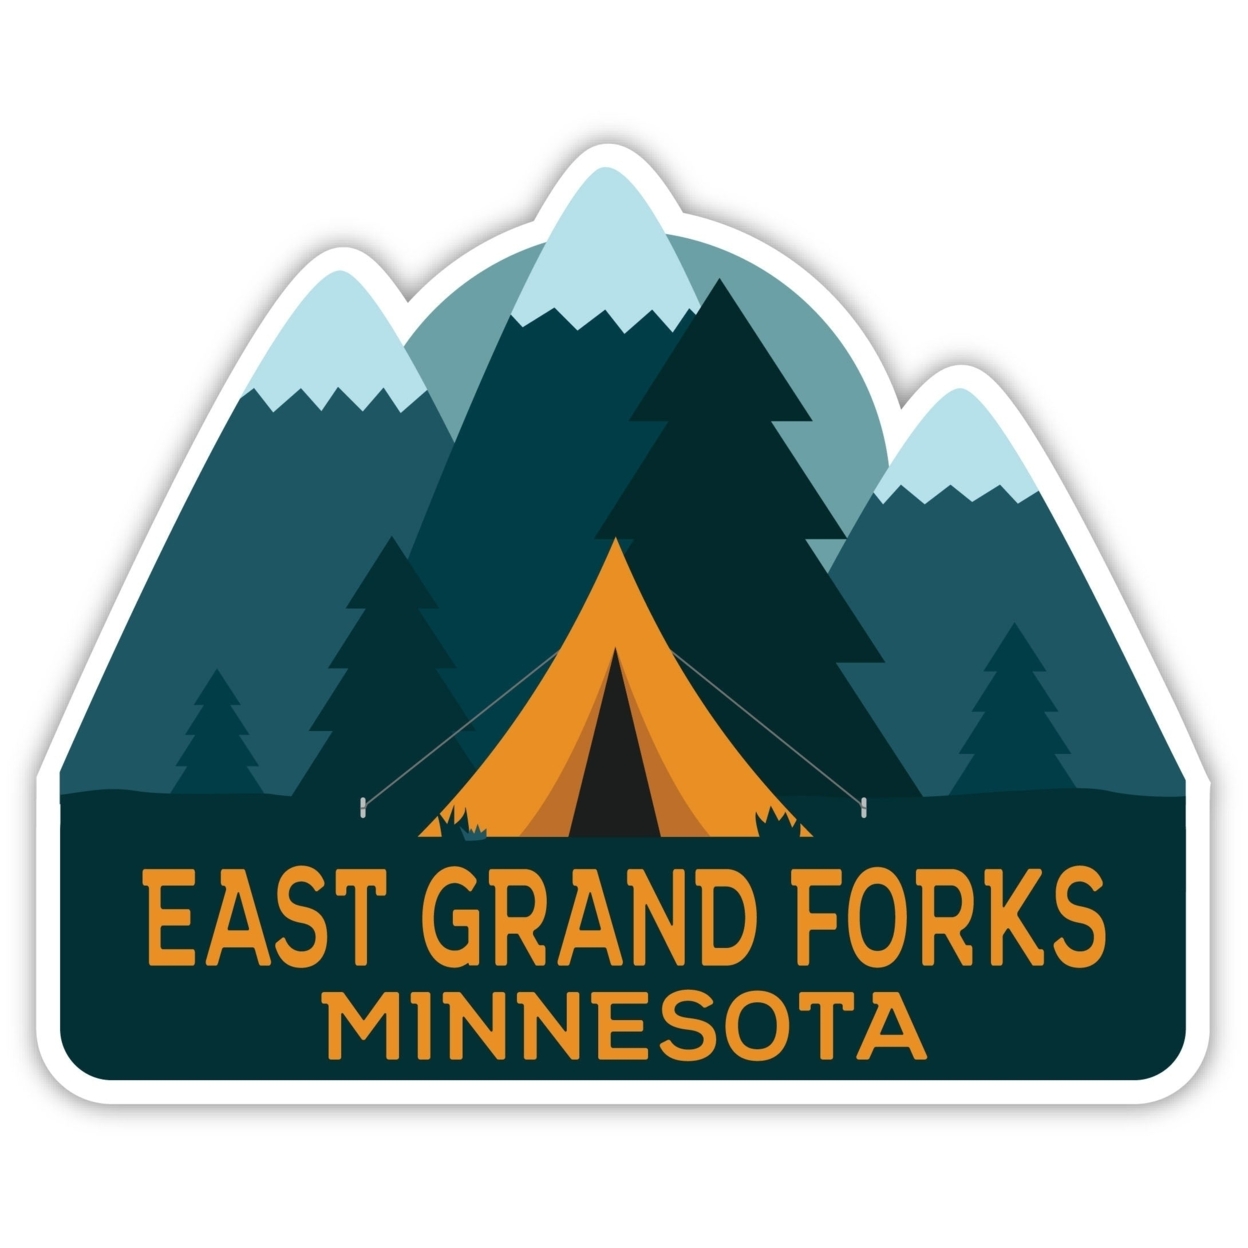 East Grand Forks Minnesota Souvenir Decorative Stickers (Choose Theme And Size) - 4-Pack, 12-Inch, Bear